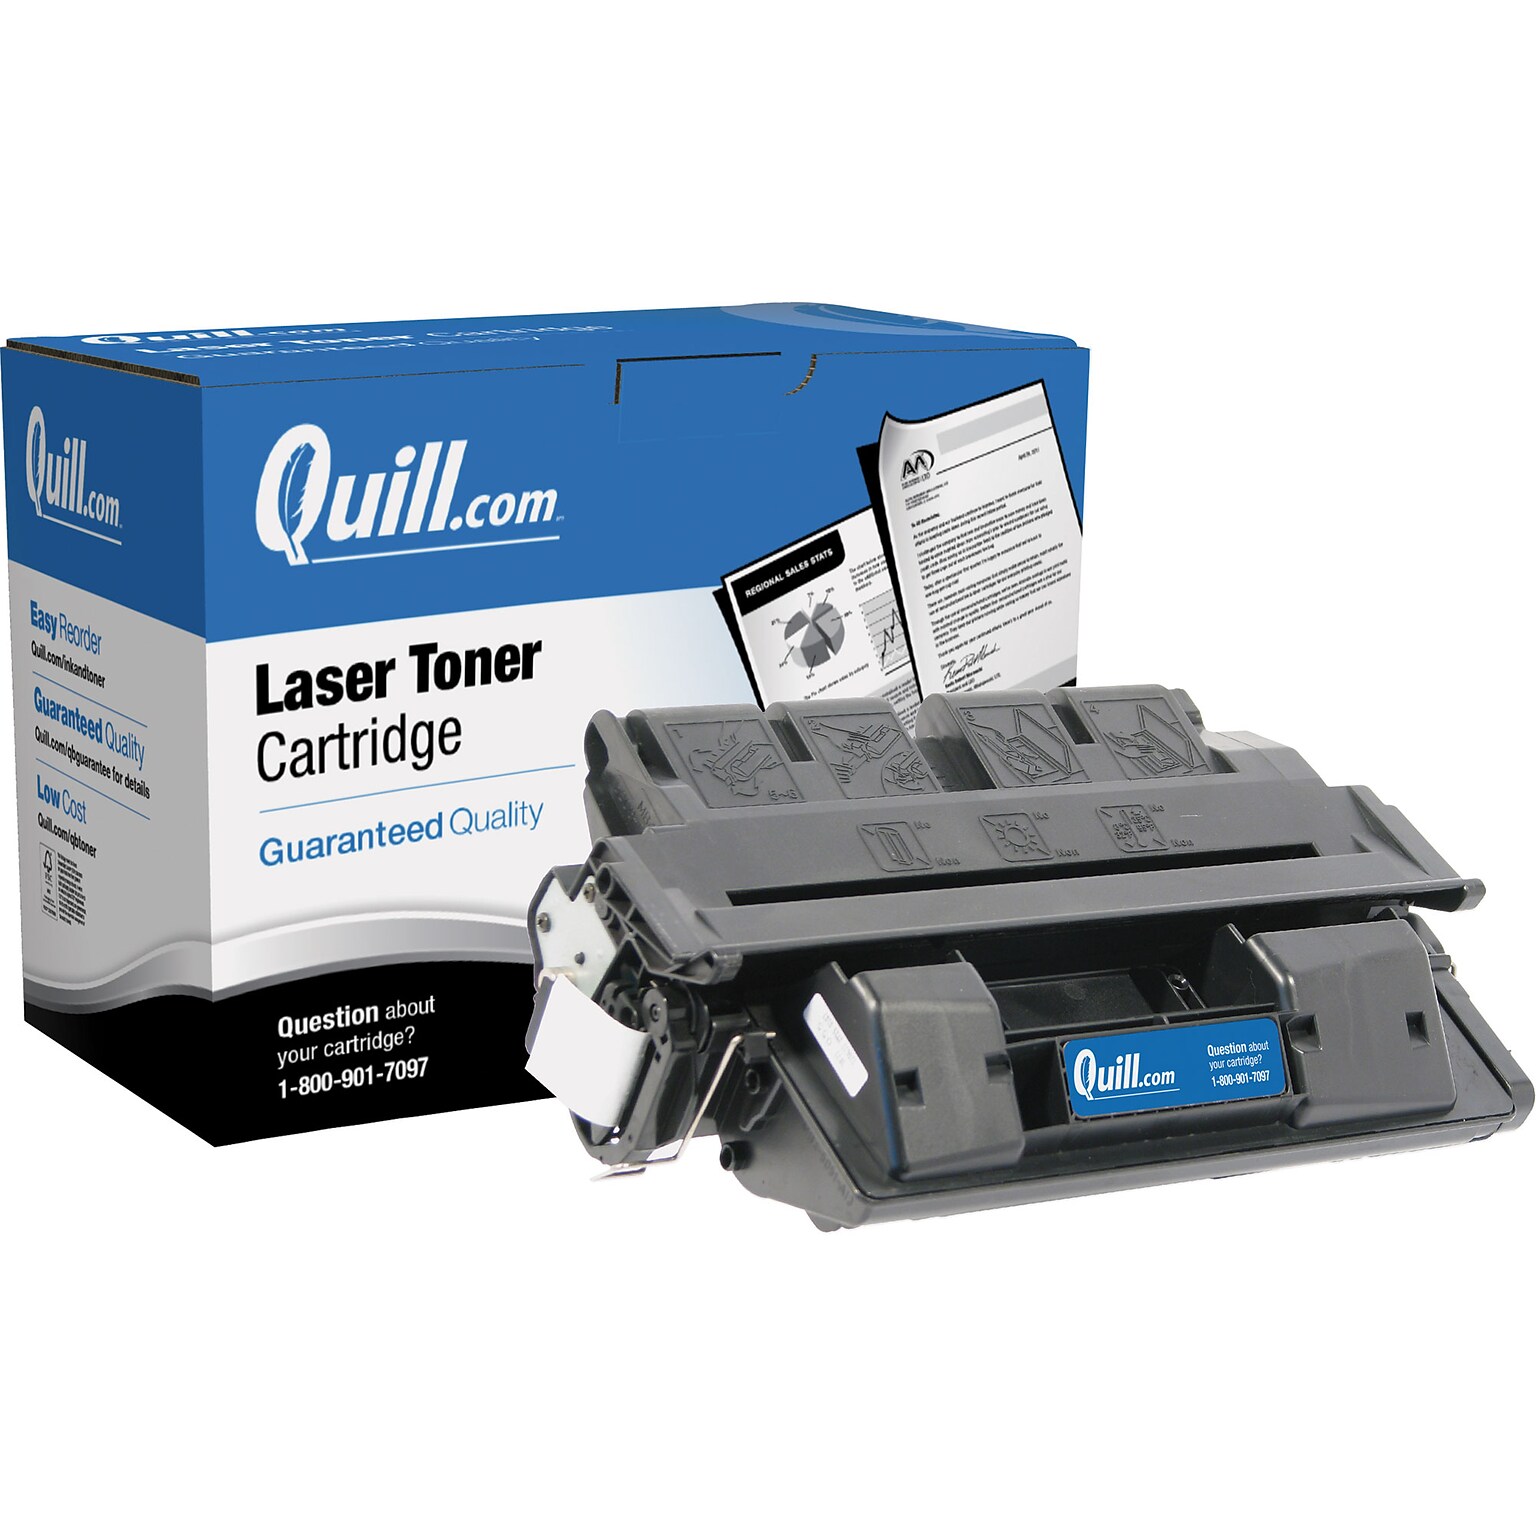 Quill Brand Remanufactured Fax Cartridge for Canon® Laser Class 3170 3175 Series (FX-6) (100% Satisfaction Guaranteed)